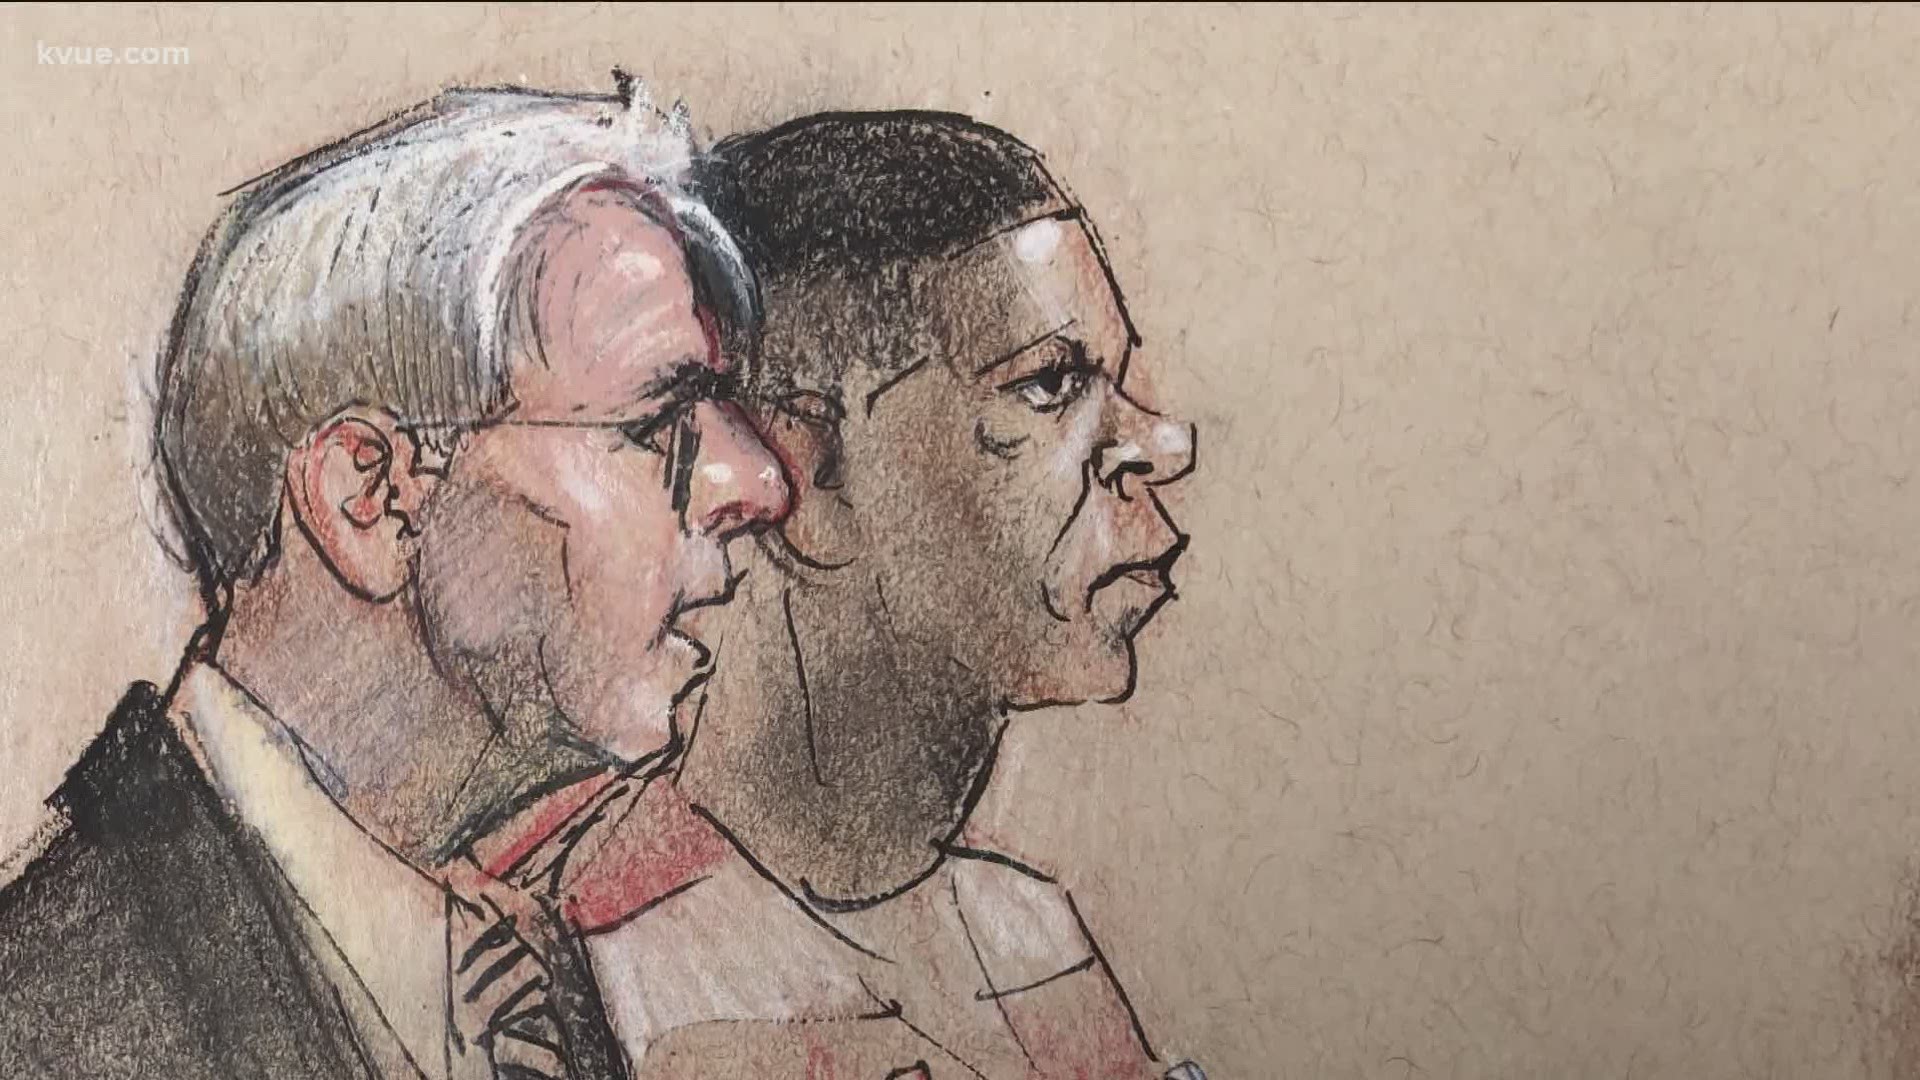 Expert testimony revolved around forensics for day seven of the Rodney Reed appeal hearing. Reed is on death row for the 1996 murder of Stacey Stites.